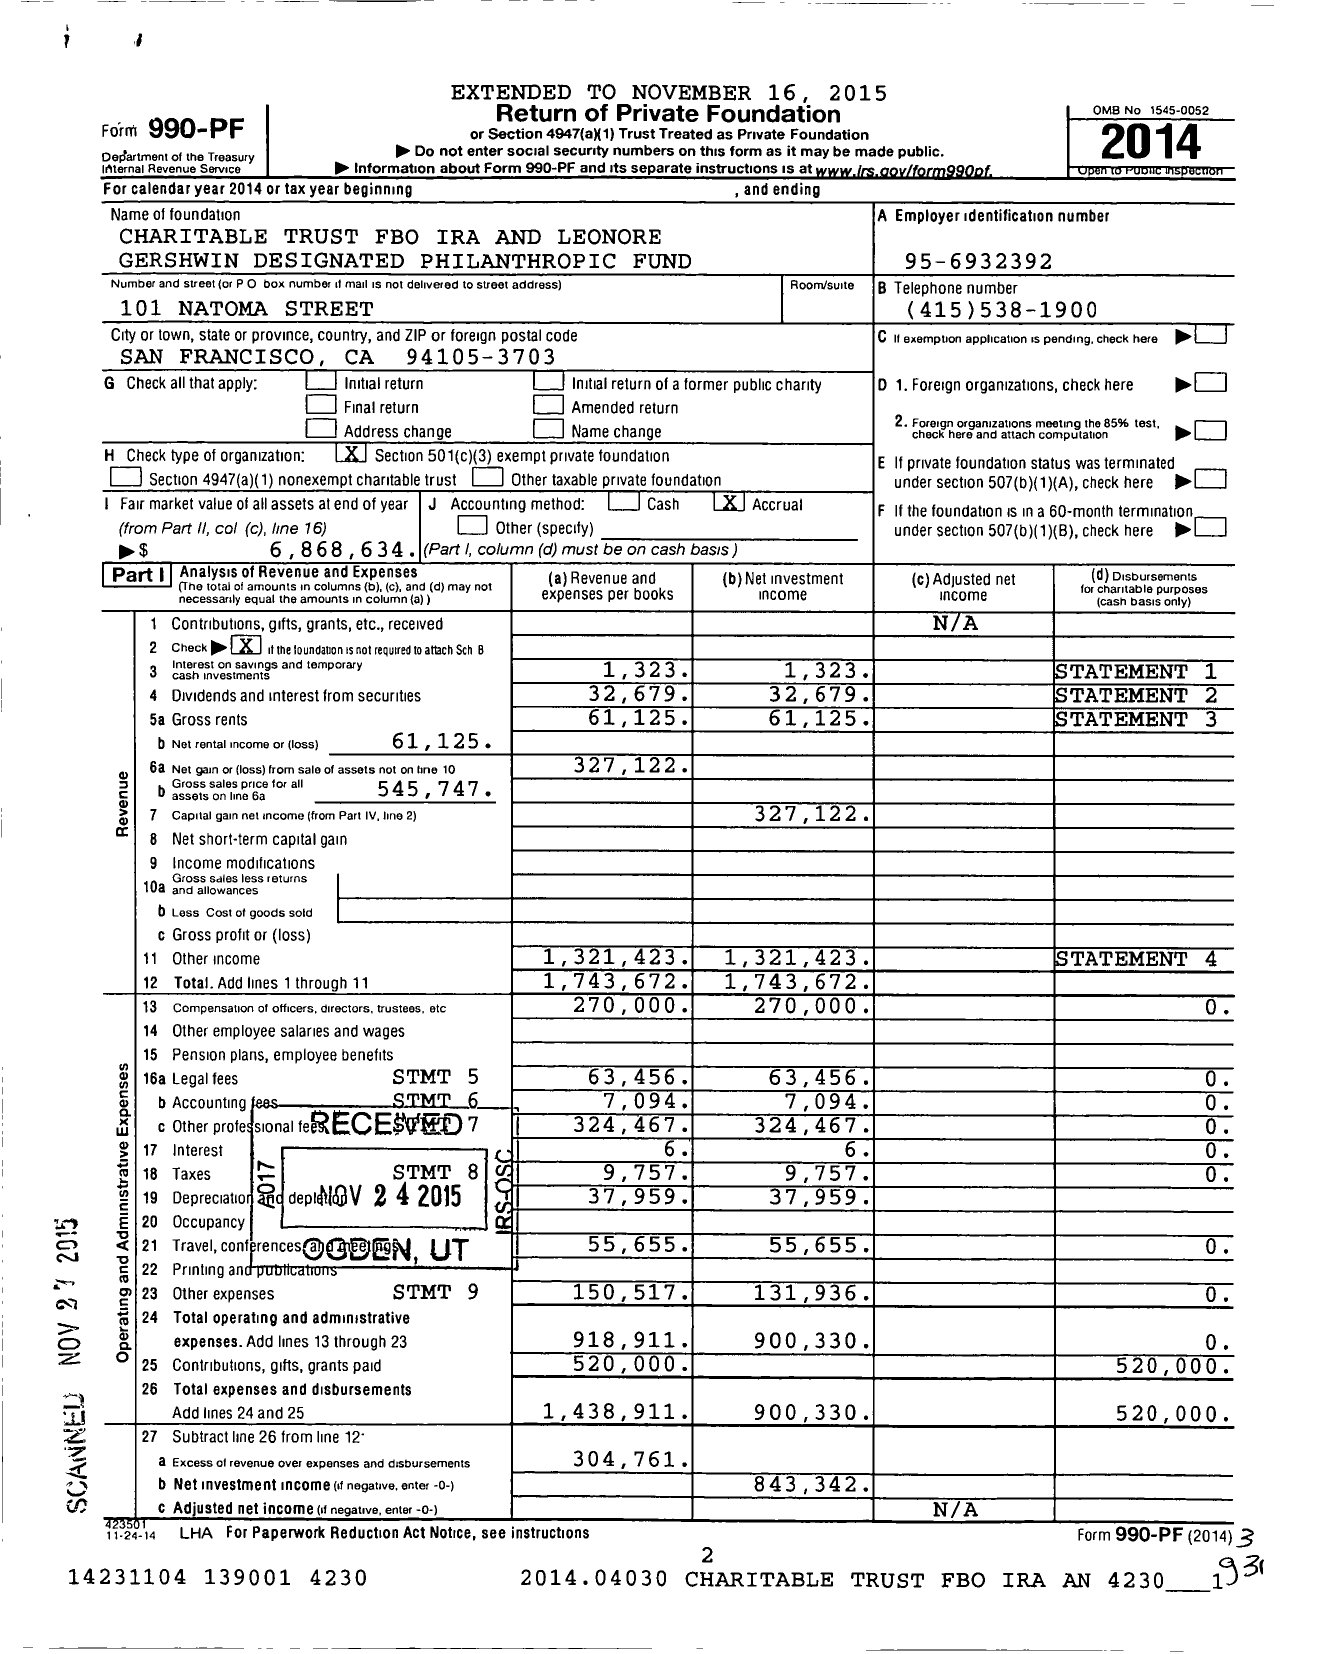 Image of first page of 2014 Form 990PF for Charitable Trust FBO Ira and Leonore Gershwin Designated Philanthropic Fund